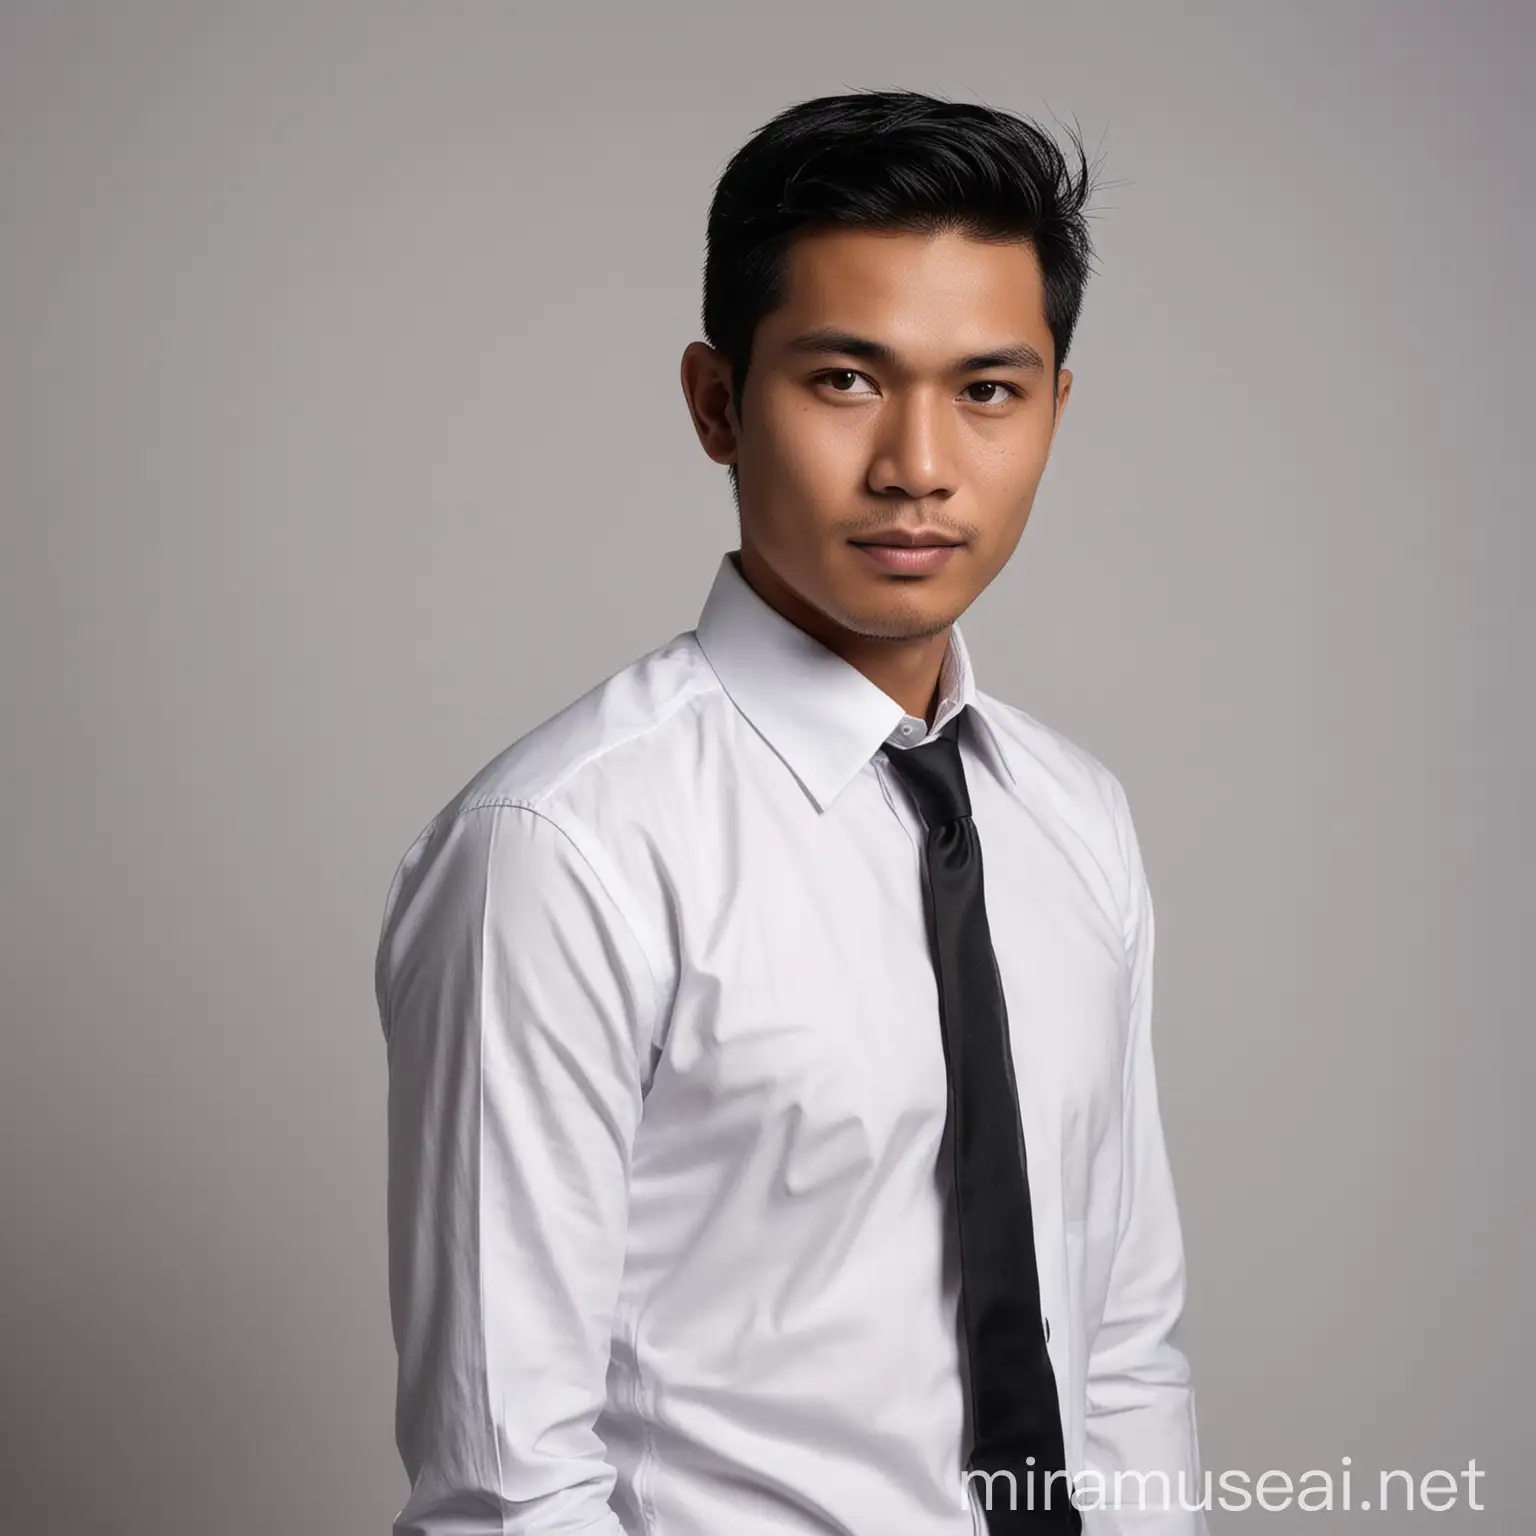 Stylish Indonesian Man in White Shirt and Black Tie Leaning Right